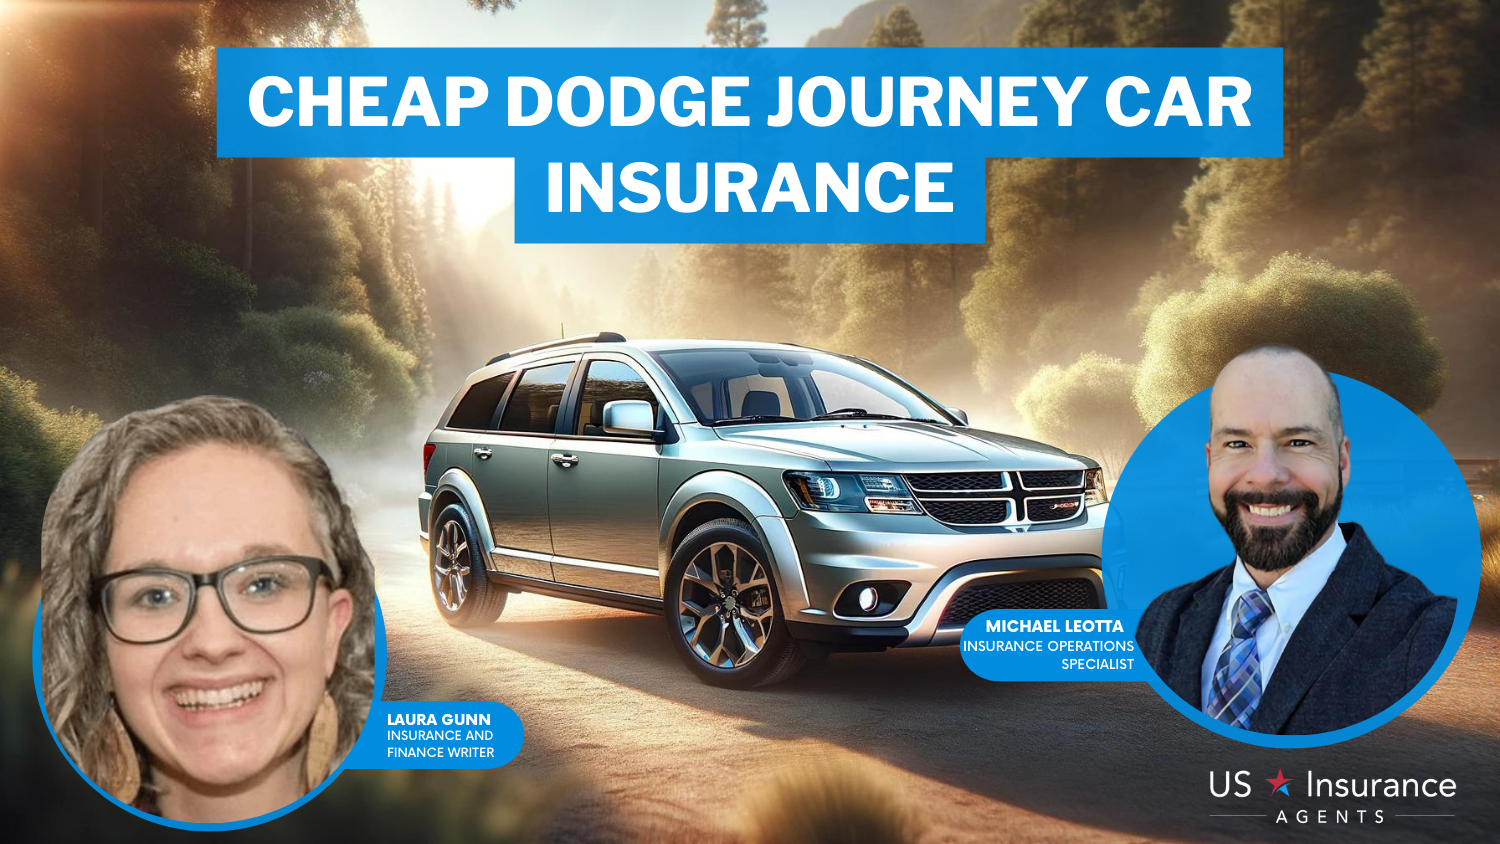 Cheap Dodge Journey Car Insurance: State Farm, American Family, and Nationwide